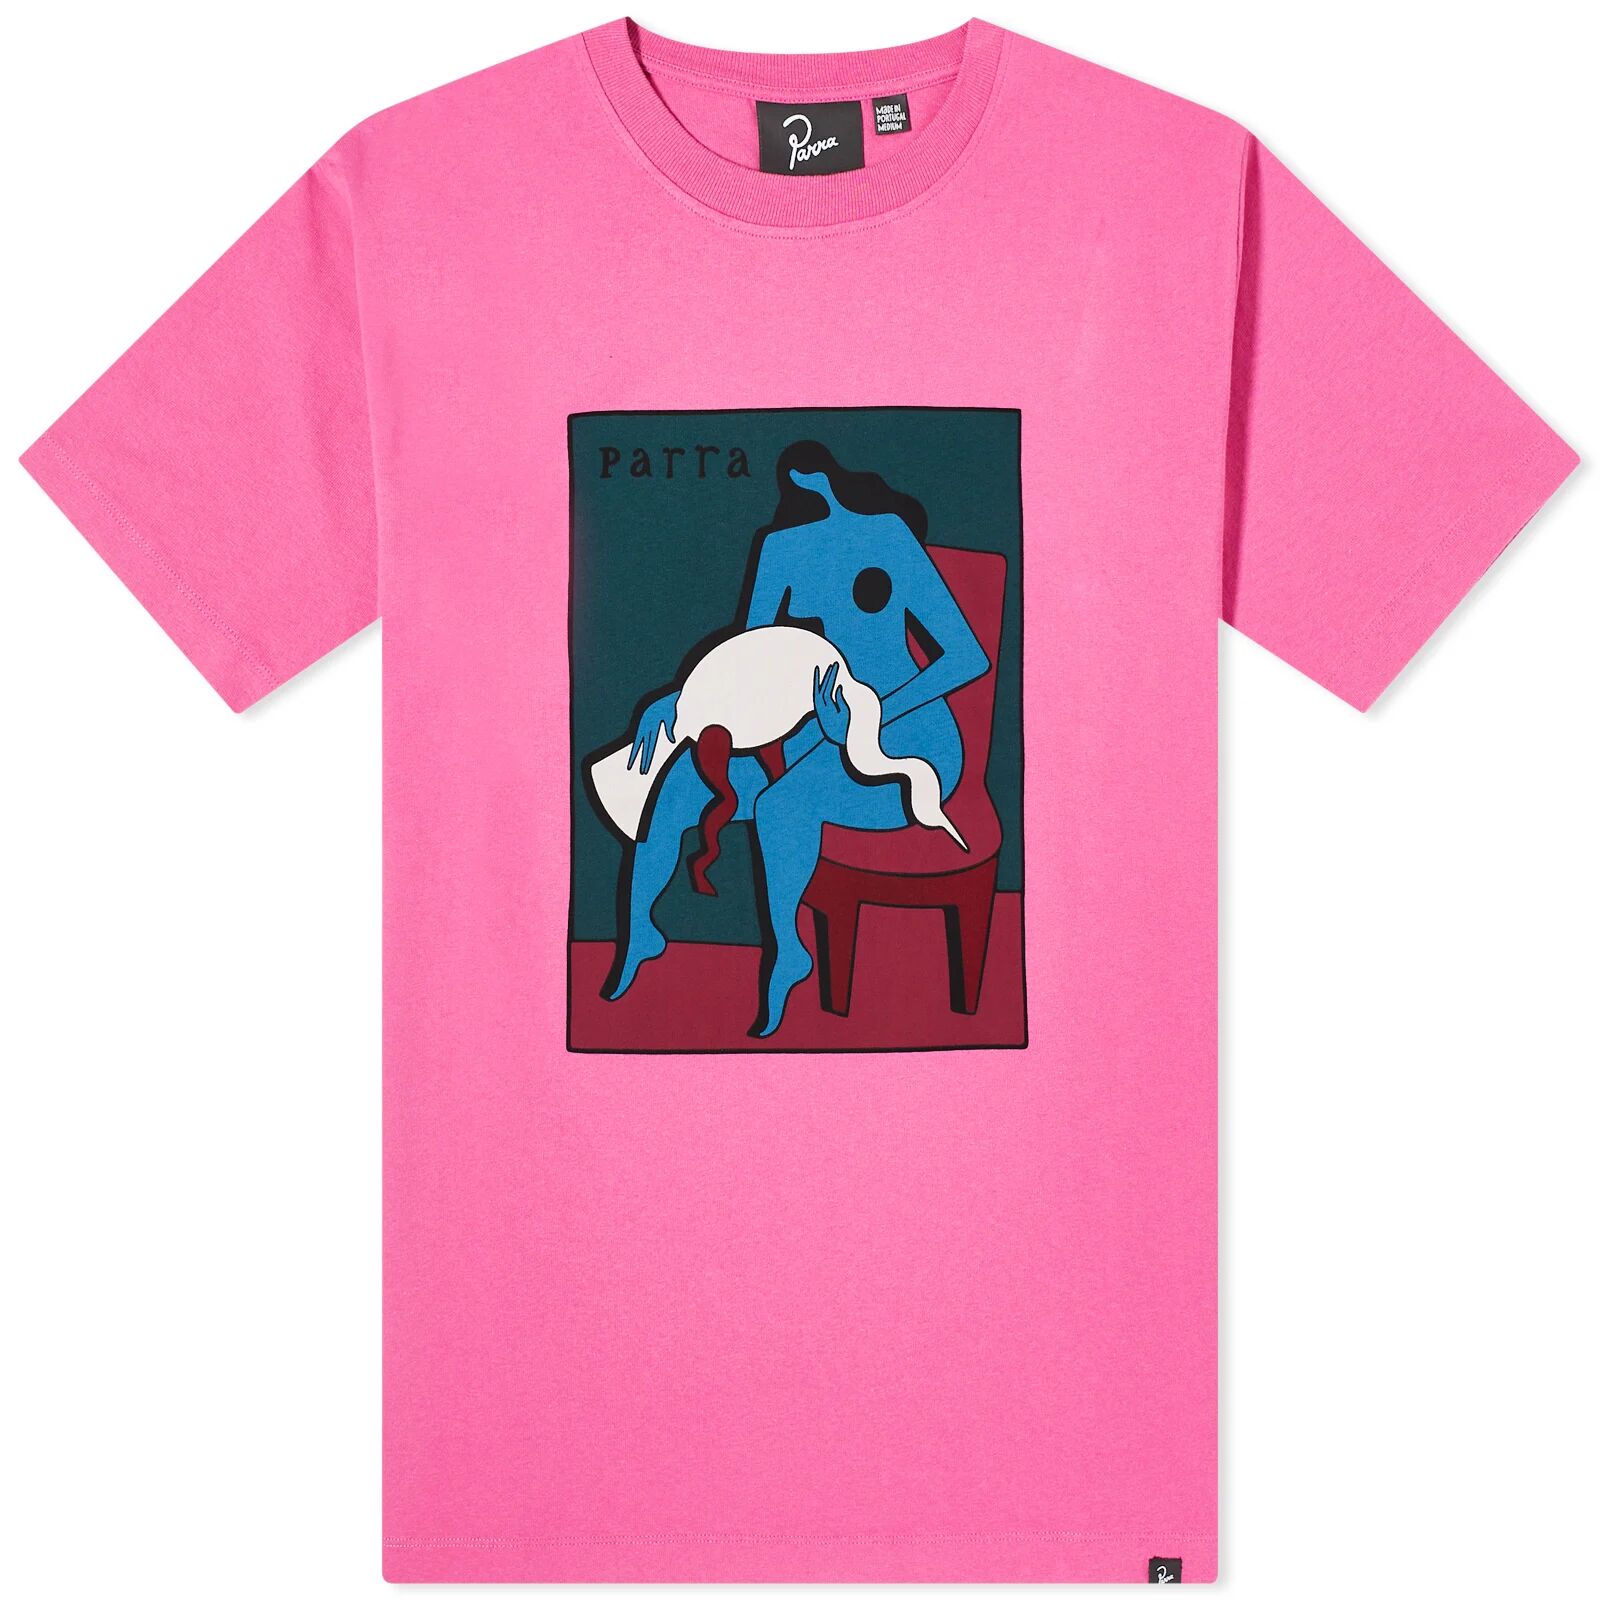 By Parra Men's My Dear Swan T-Shirt in Pink, Size XX-Large